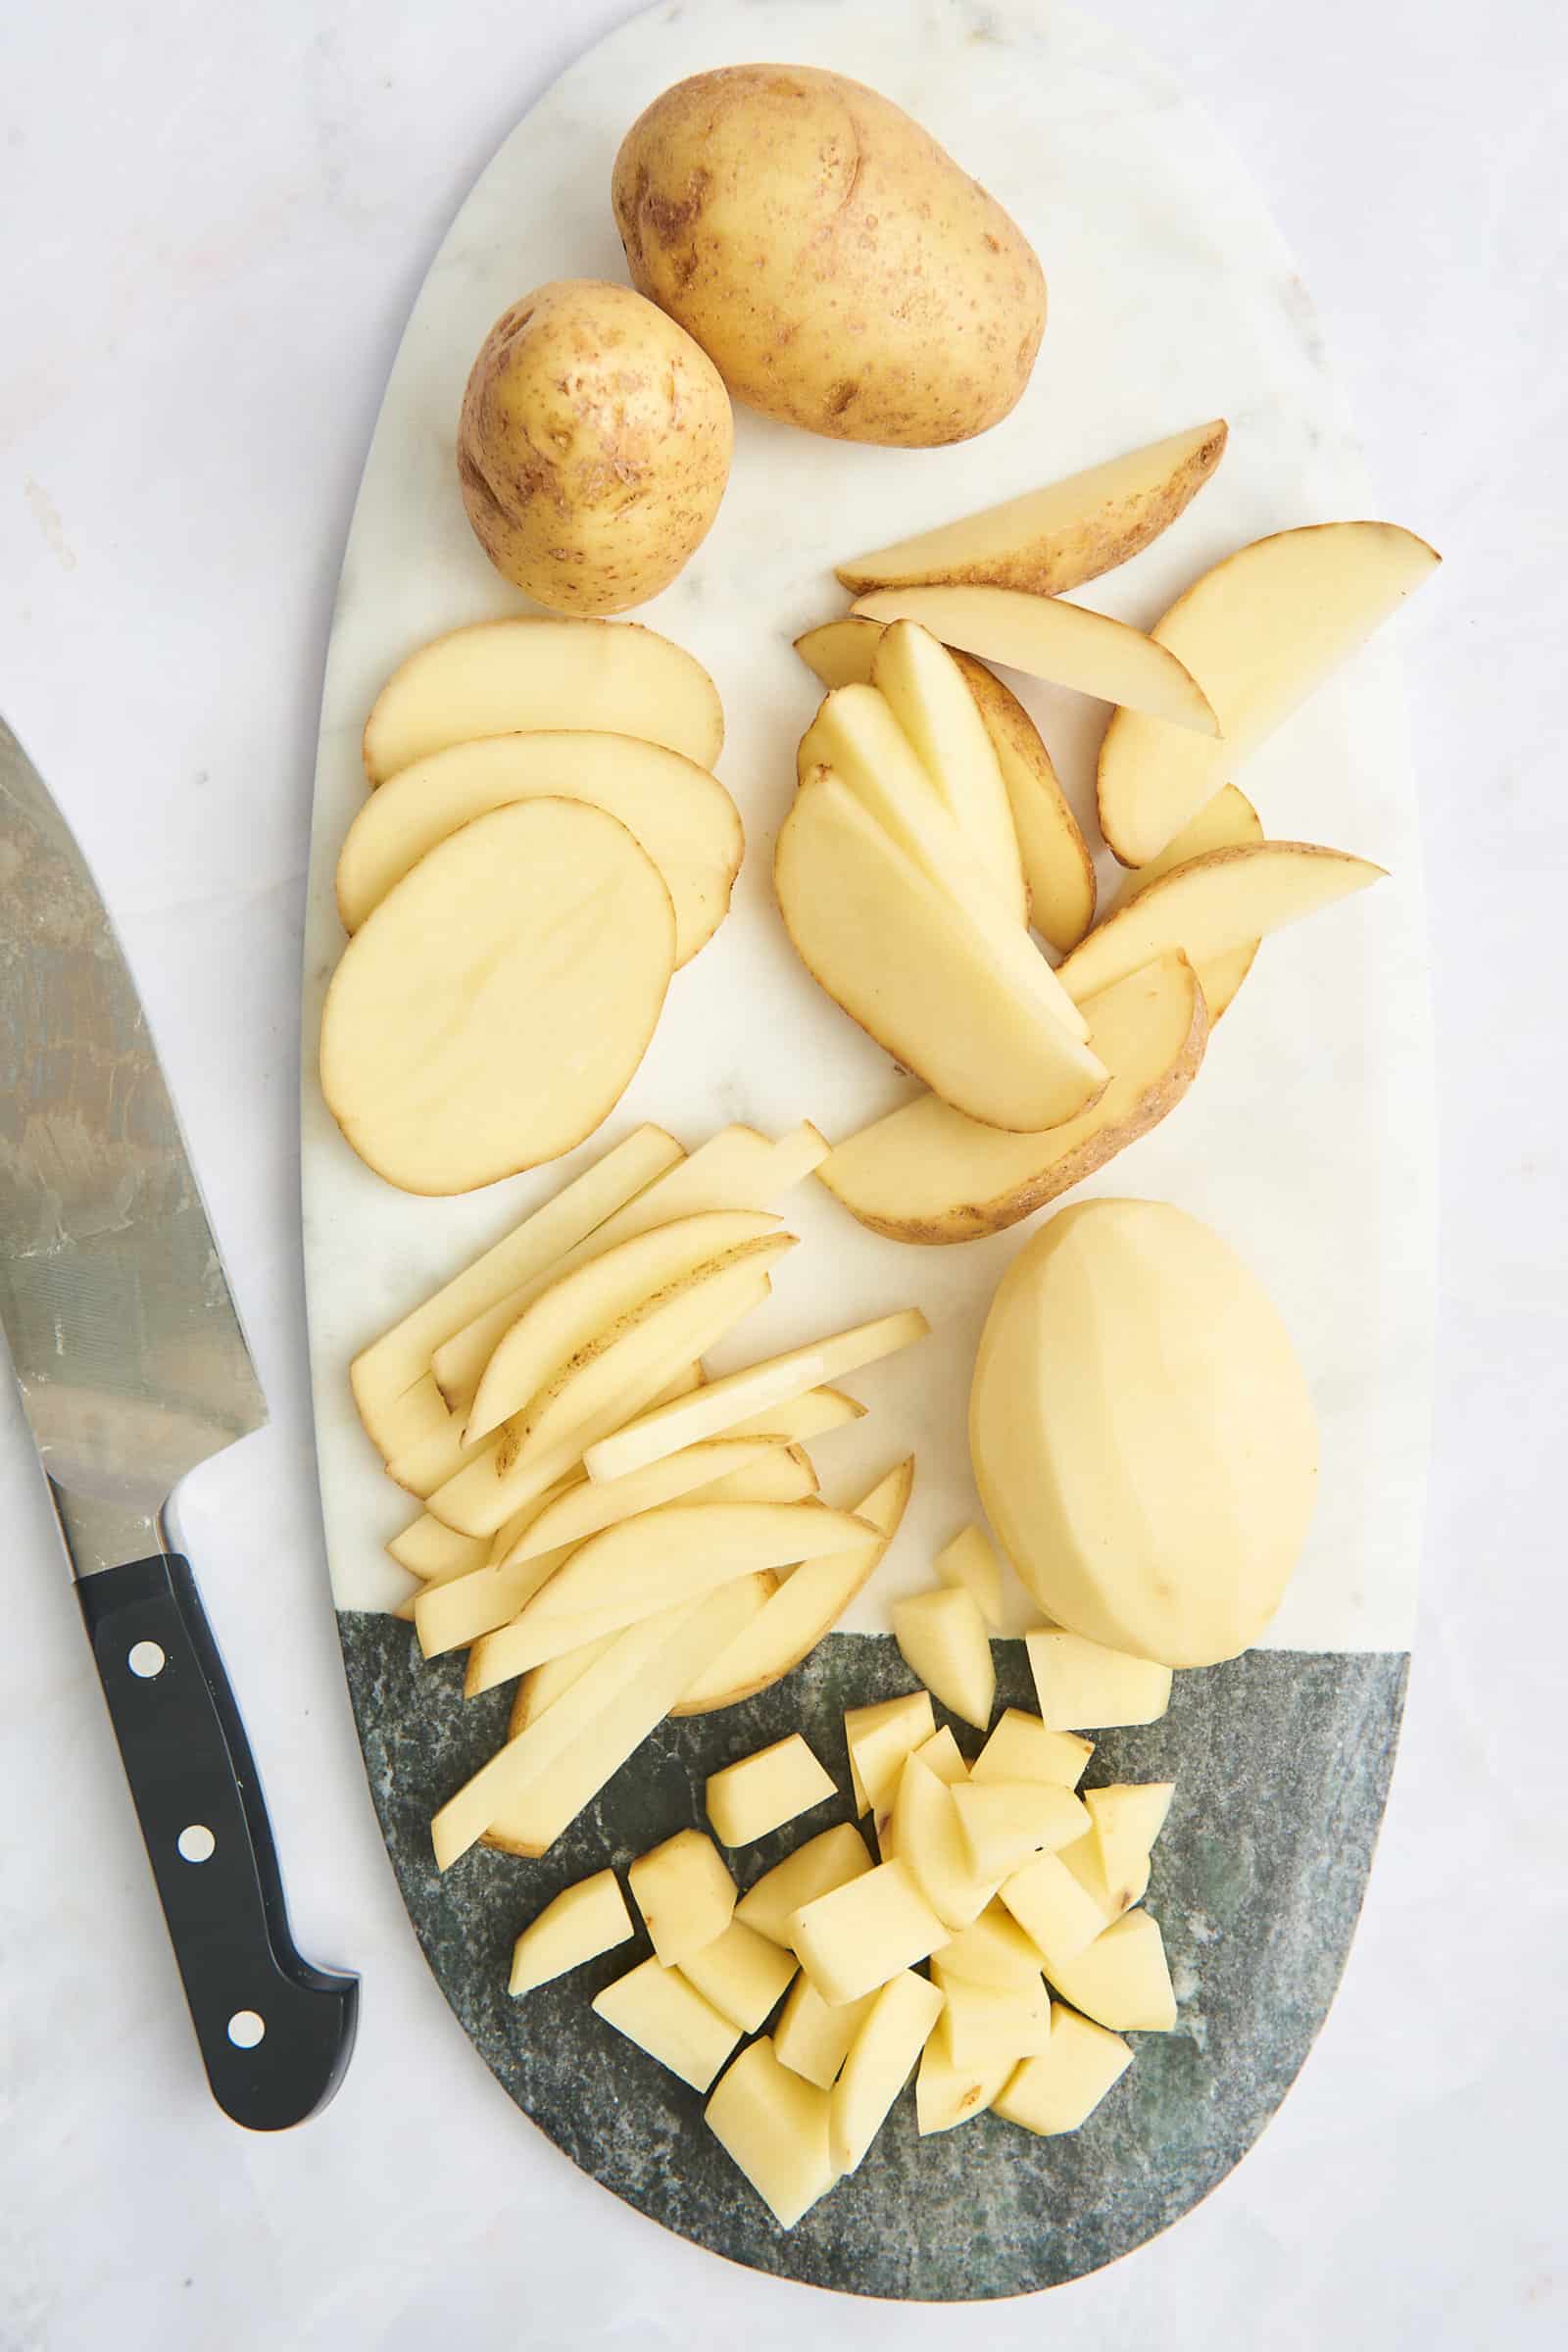 Whole potatoes, peeled potatoes, potato slices, wedges, fries, and cubes.